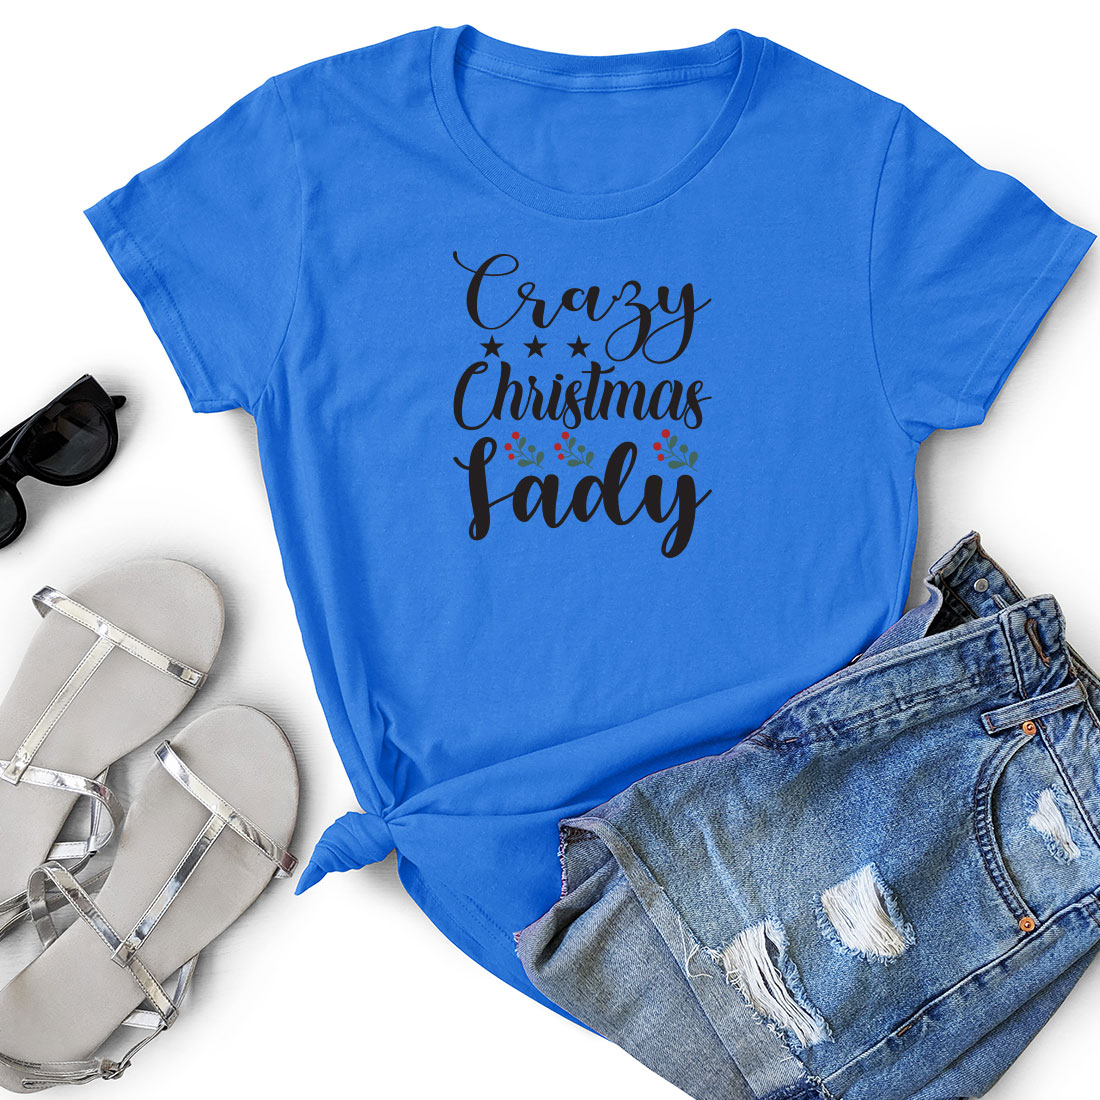 T - shirt that says easy christmas fady next to a pair of shorts.